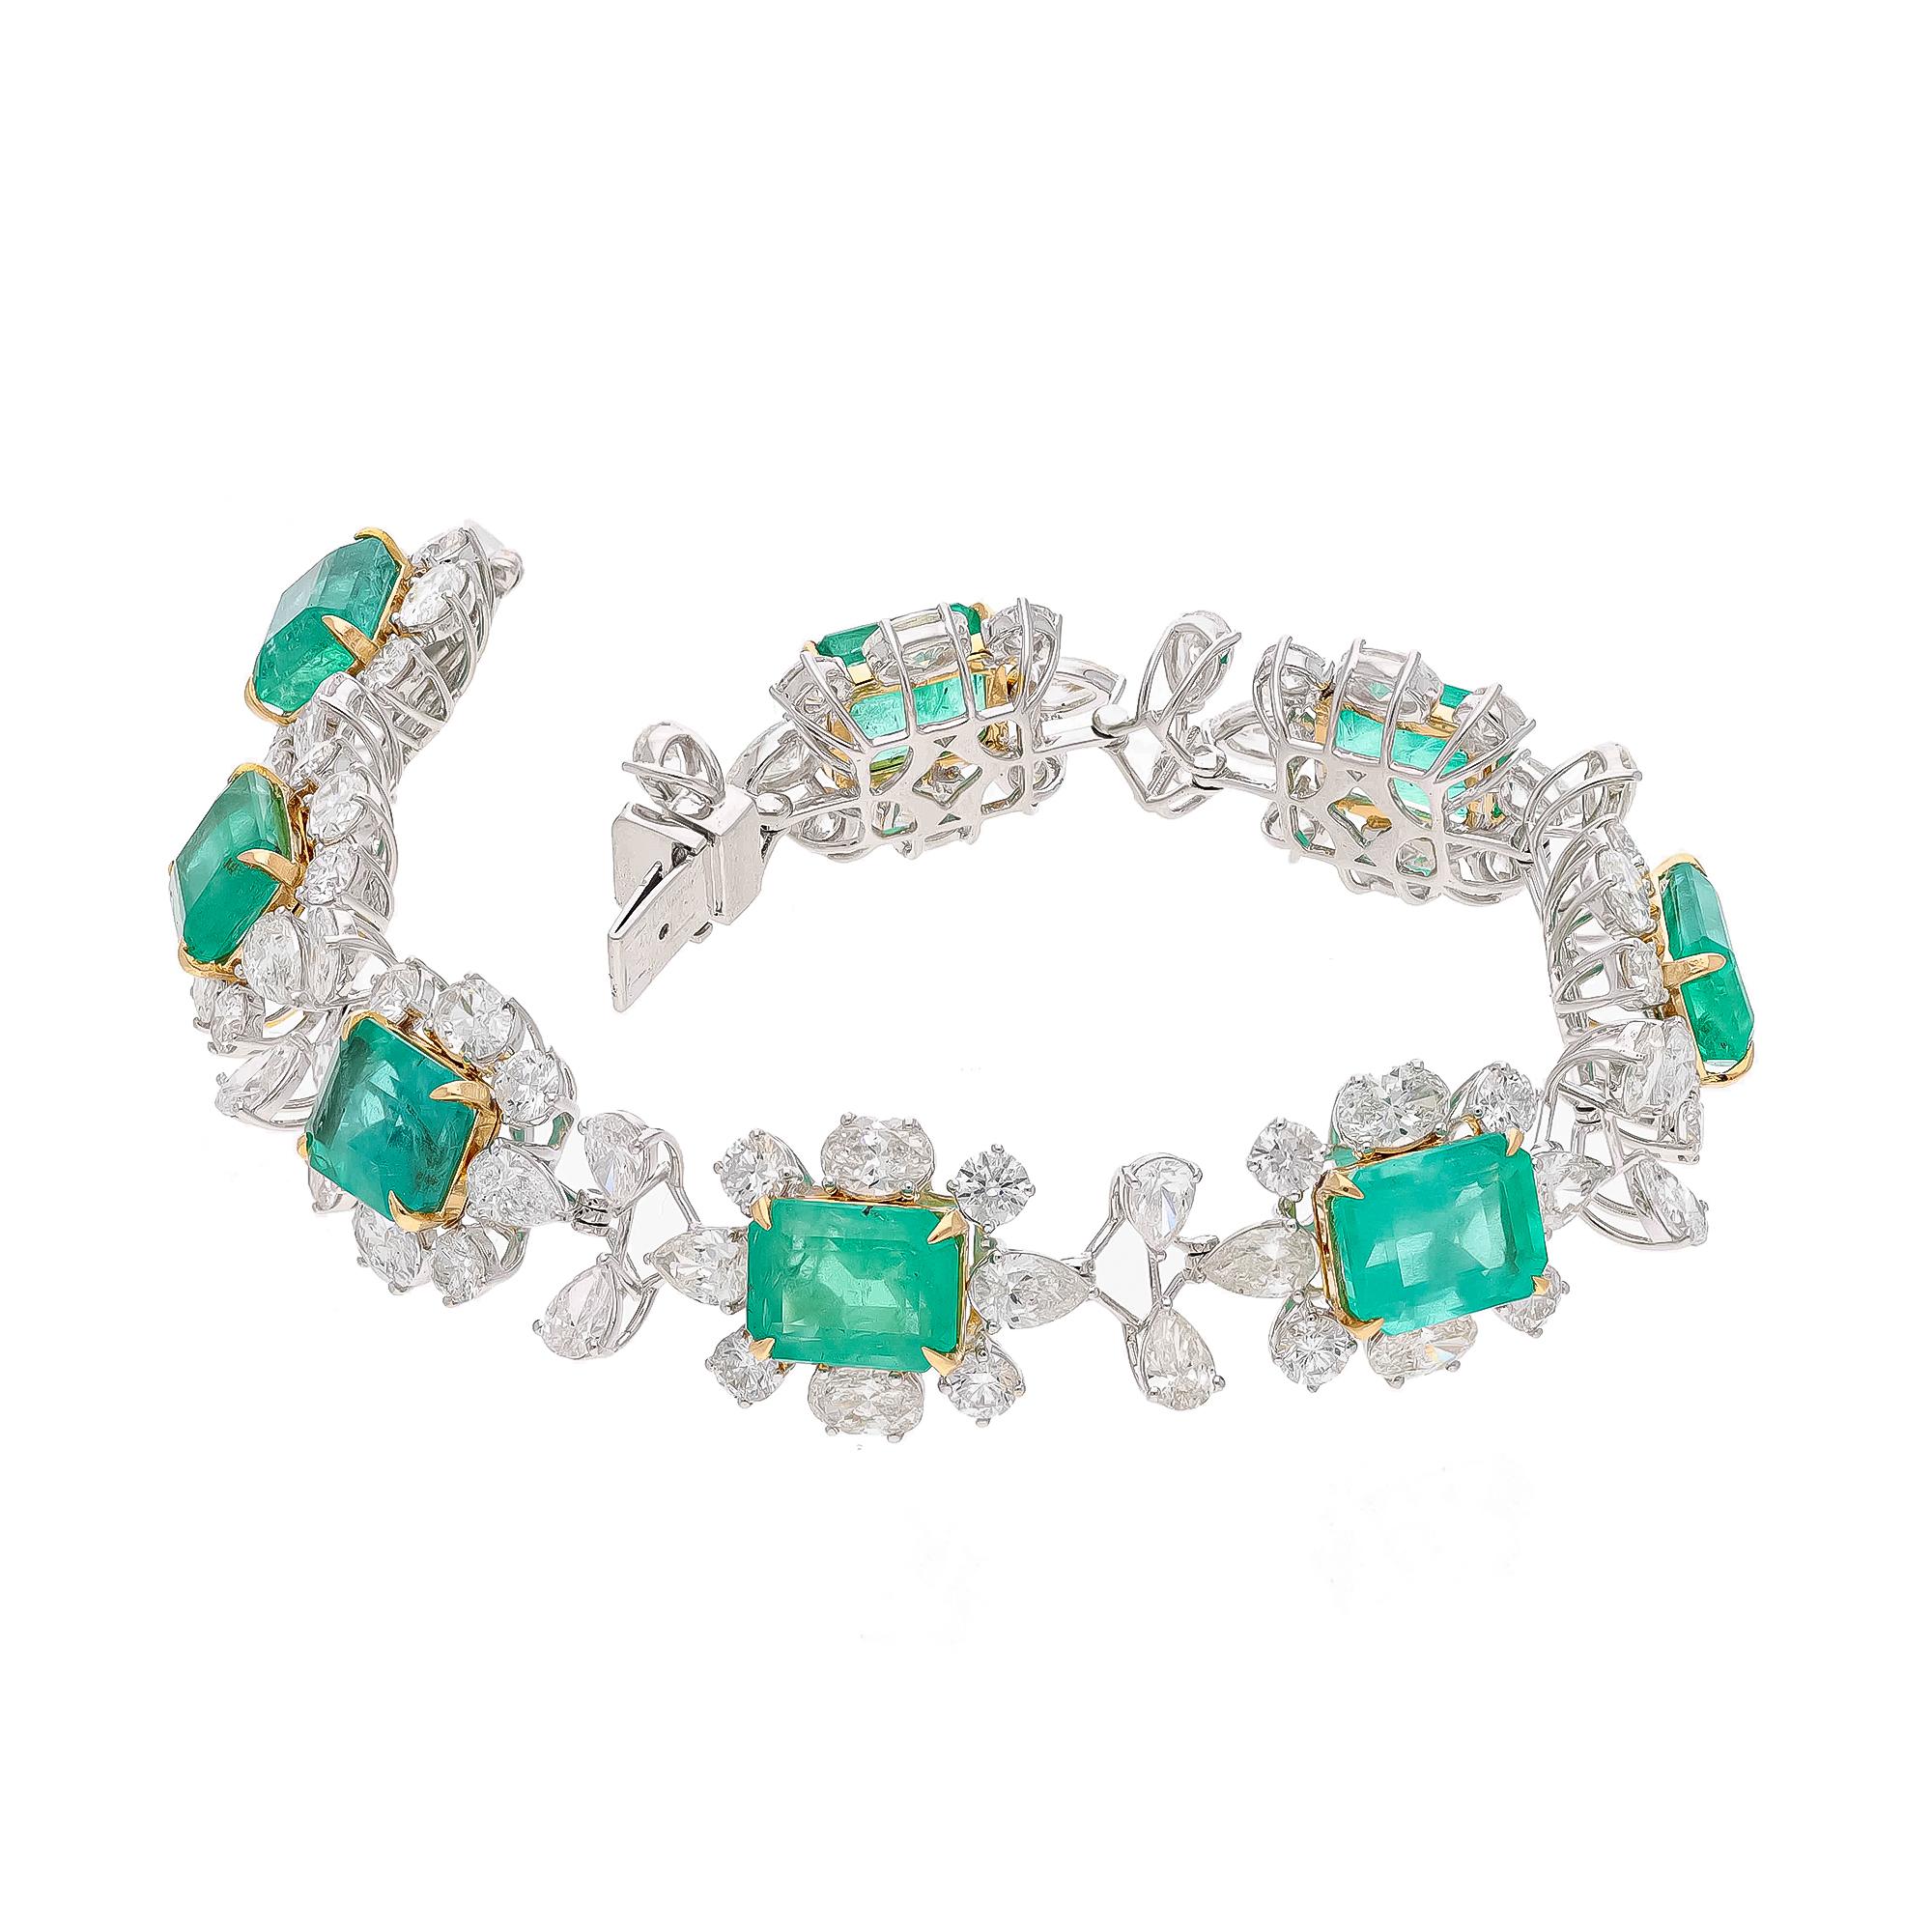 Women's Natural Zambian Emerald Bracelet with Diamond and 18k Gold For Sale